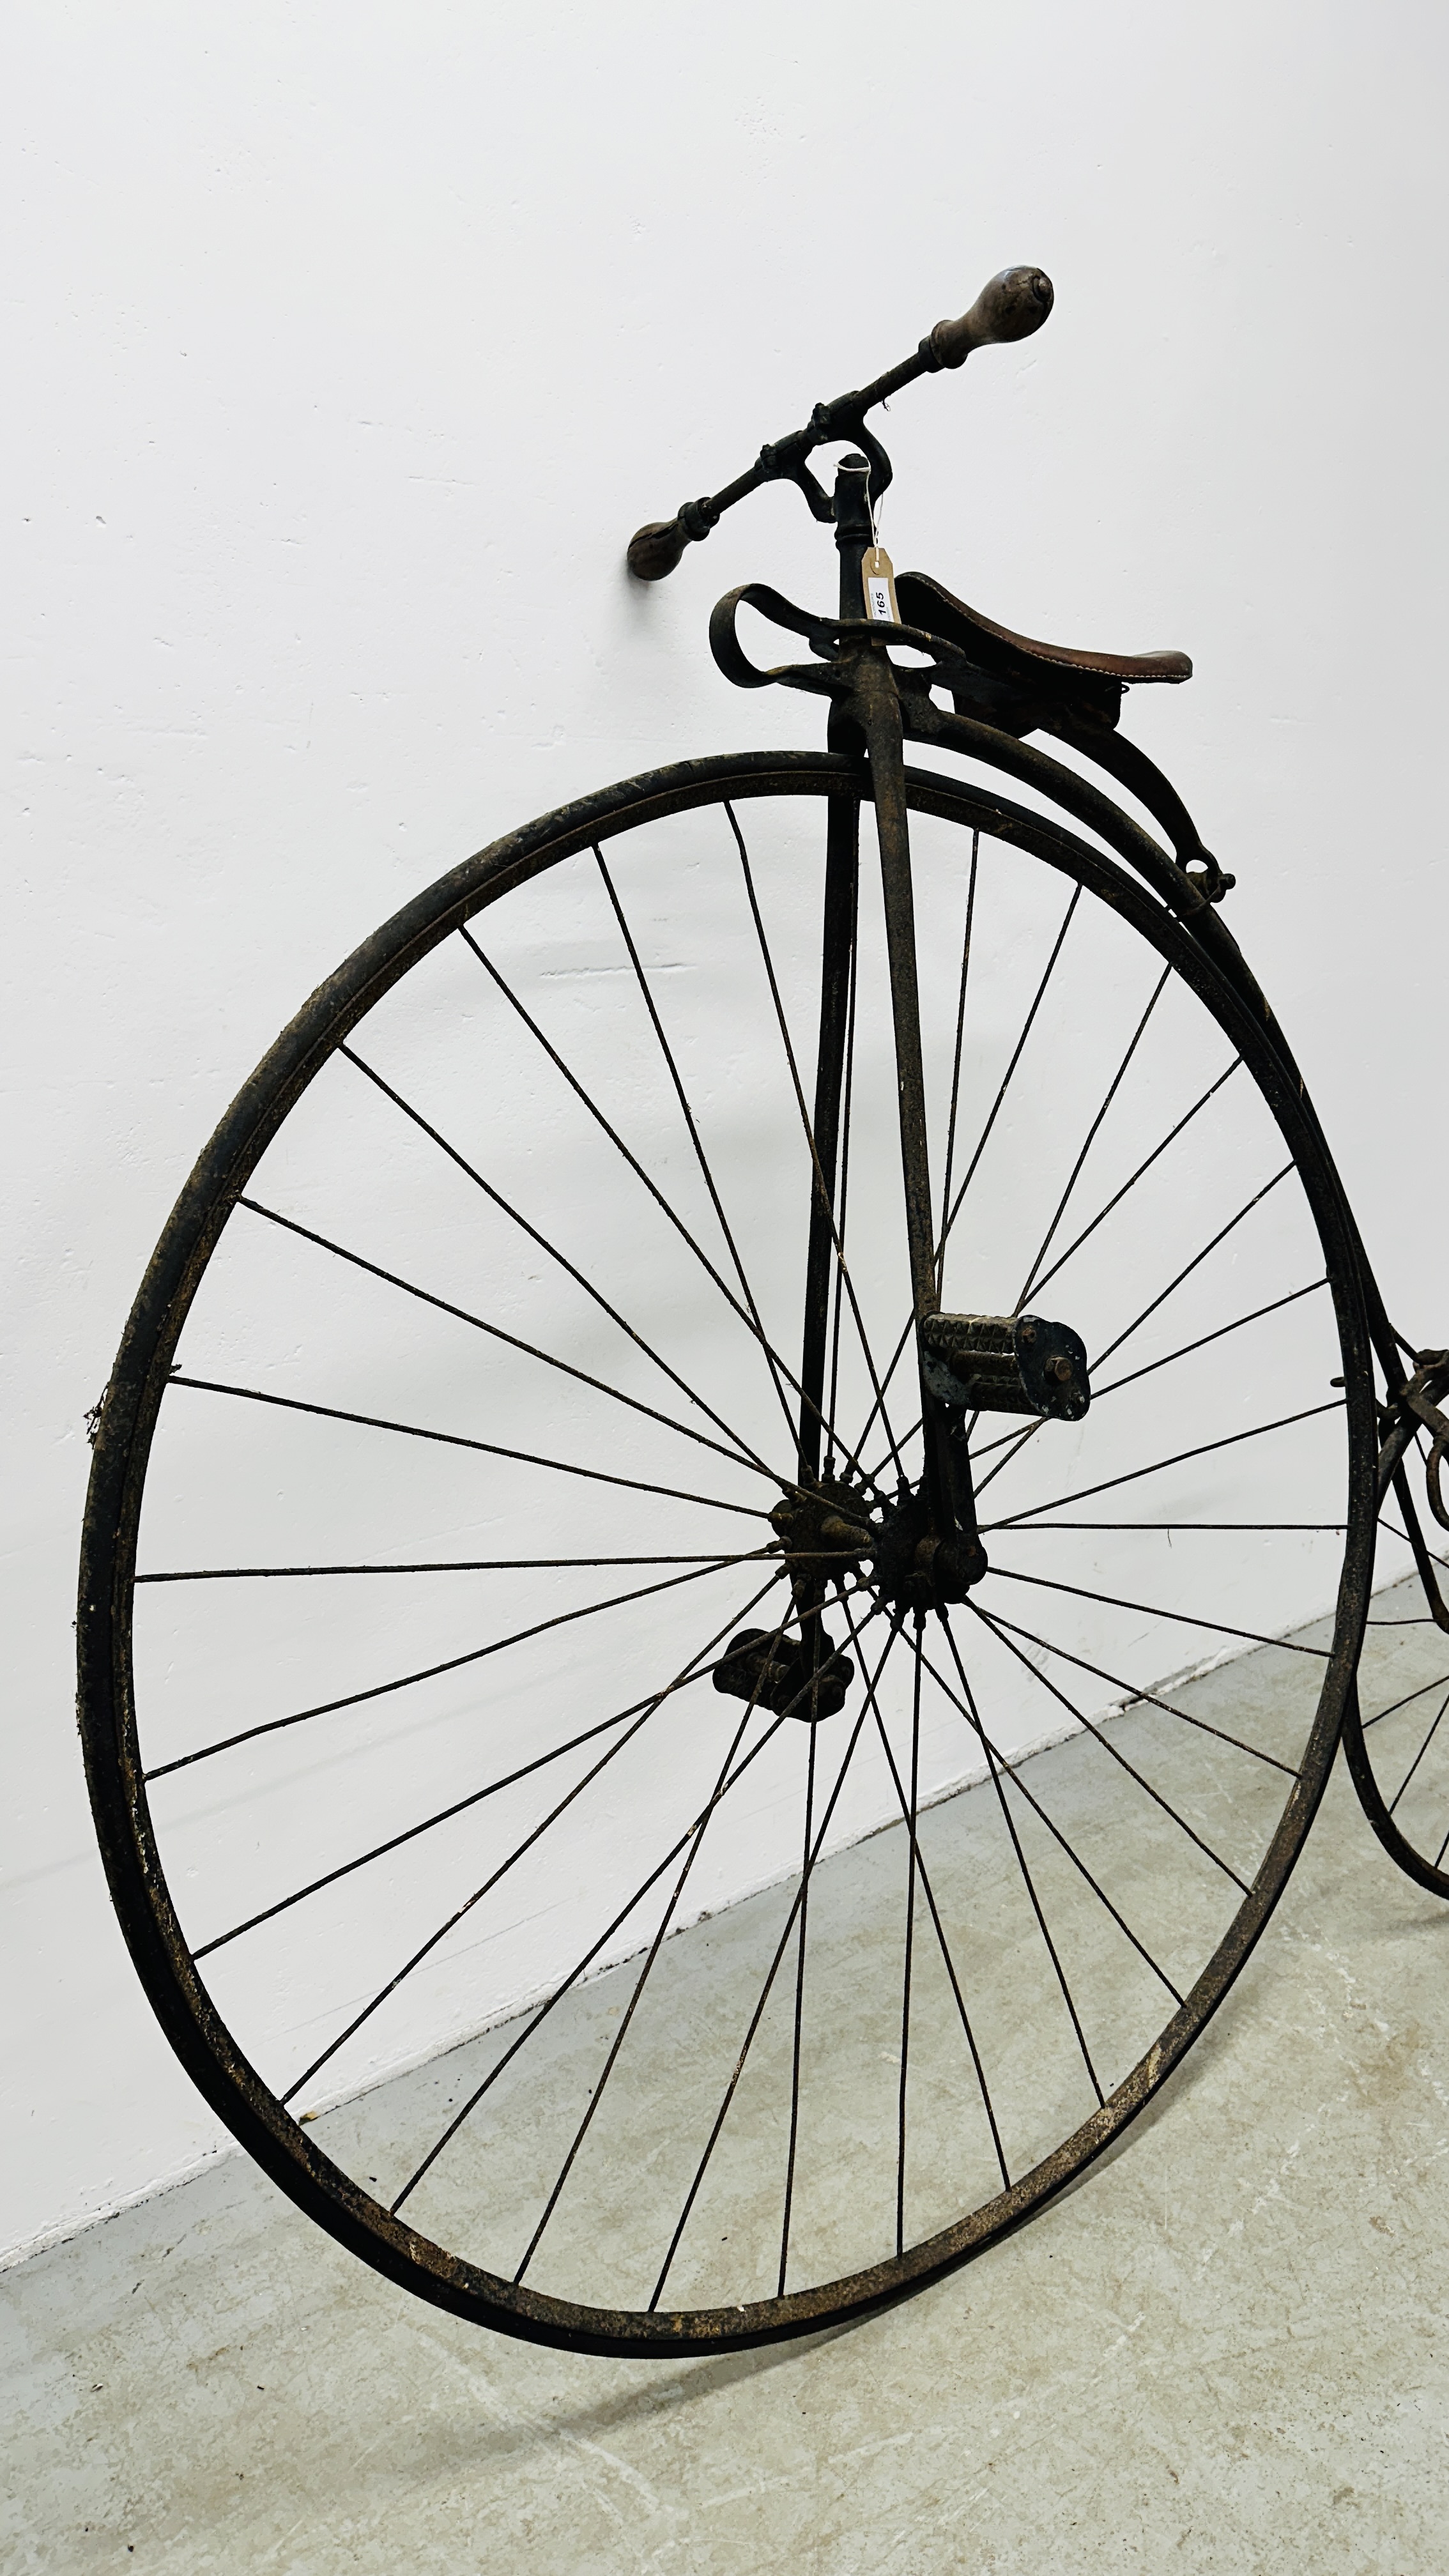 AN ANTIQUE PENNY FARTHING / HIGH WHEEL BICYCLE, HEIGHT 147CM, FRONT WHEEL RIM 119CM. - Image 2 of 20